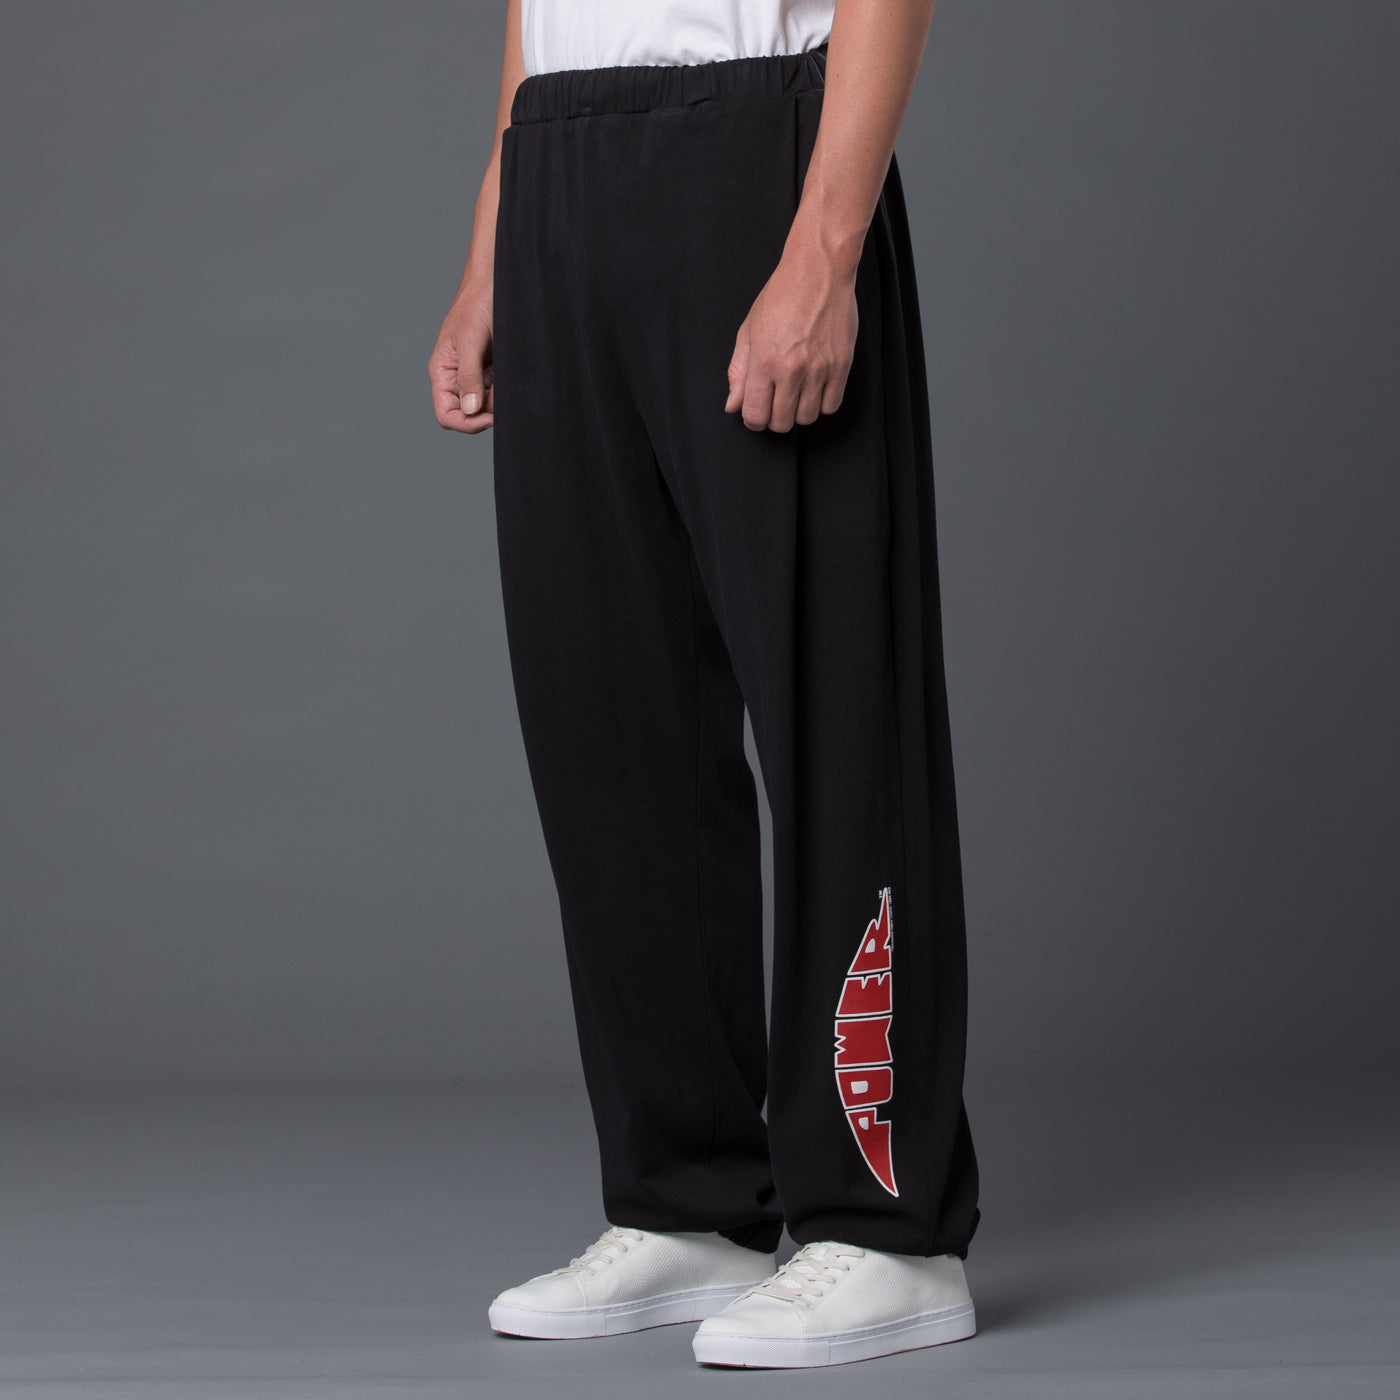 Willy Chavarria Power Cholo Sweatpant